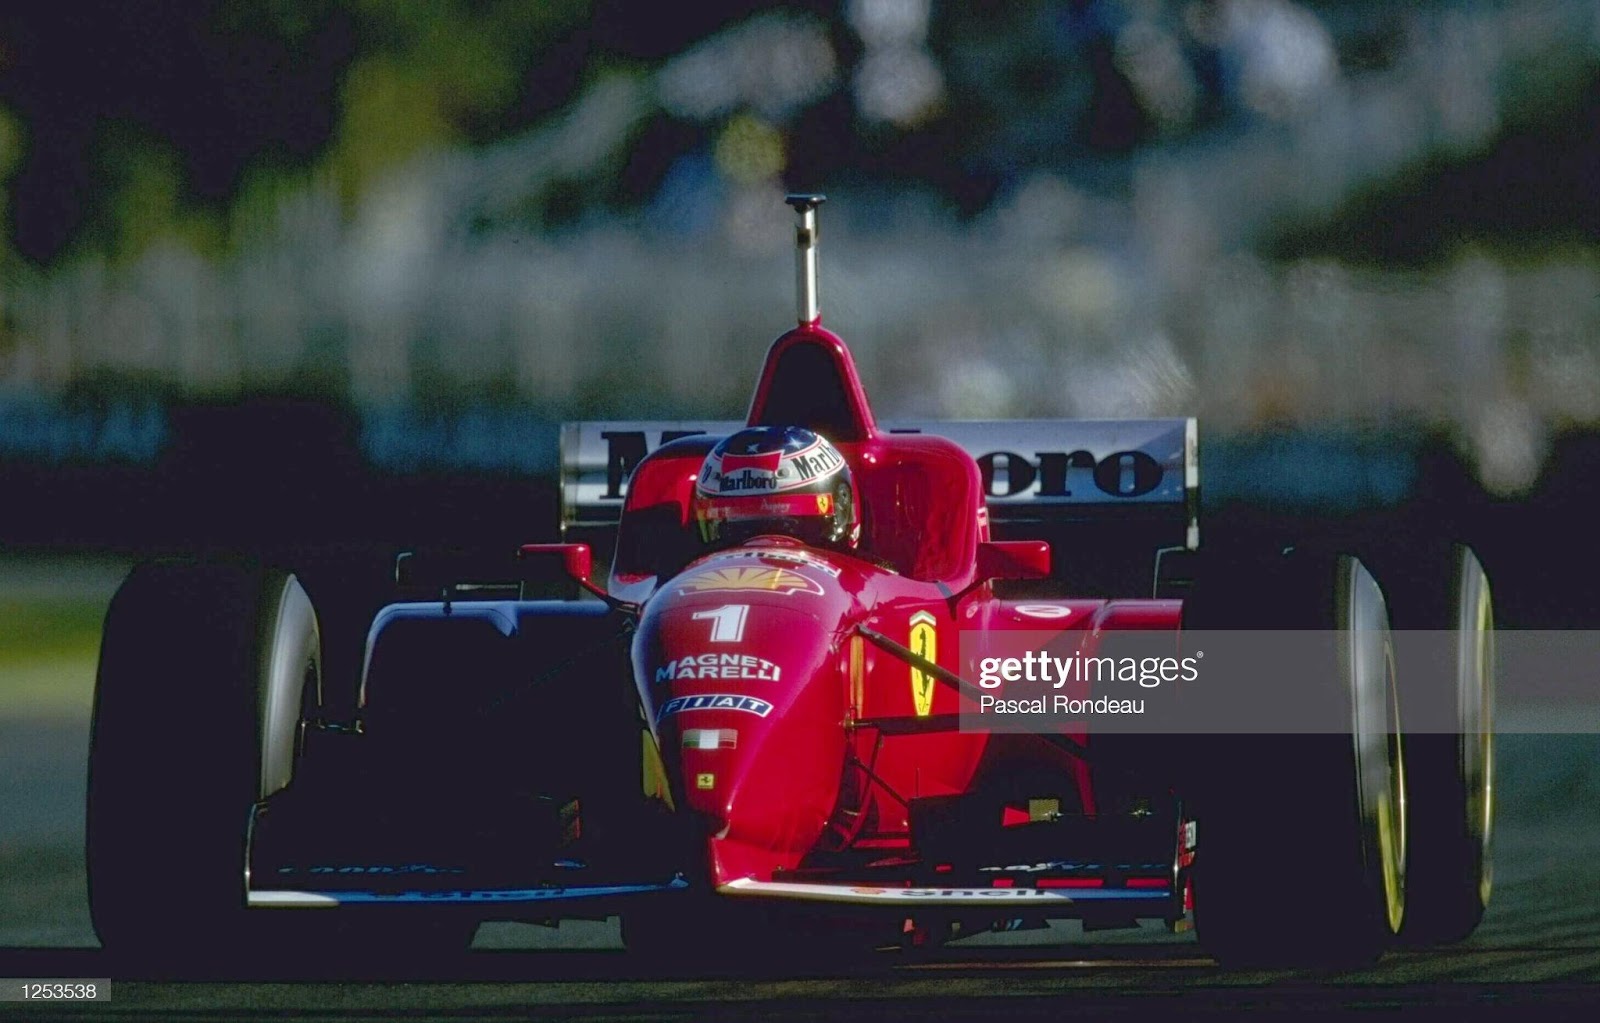 Michael Schumacher in action in his Ferrari during the Australian F1 Grand Prix at Albert Park, Melbourne, on March 10, 1996.